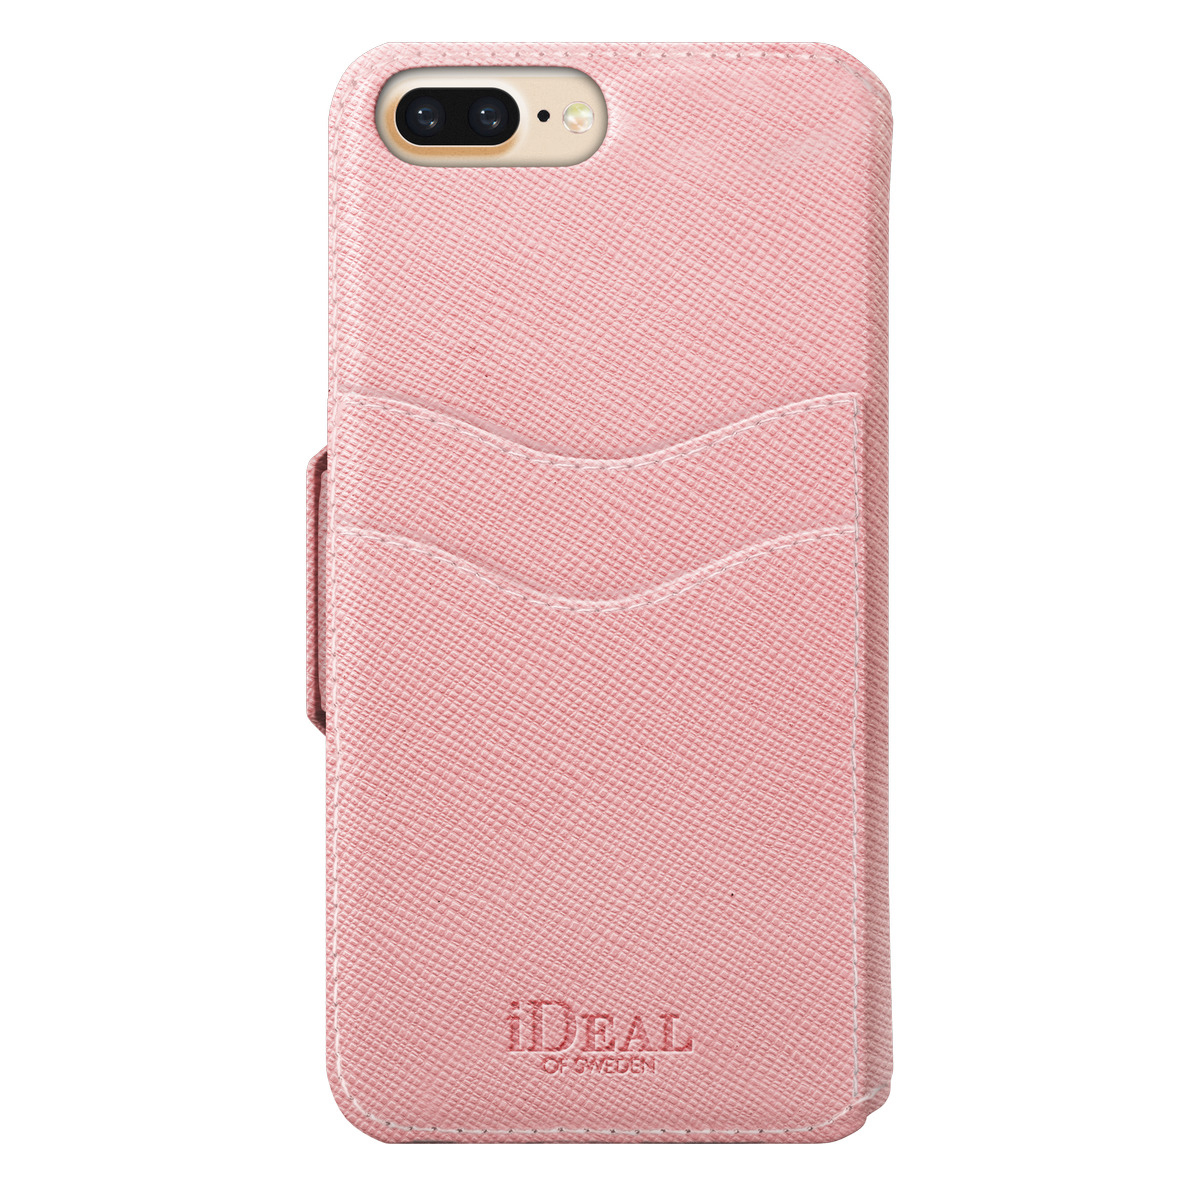 IDEAL OF SWEDEN Apple, Rosa Fashion, Bookcover, 8, 7, 6, iPhone iPhone iPhone